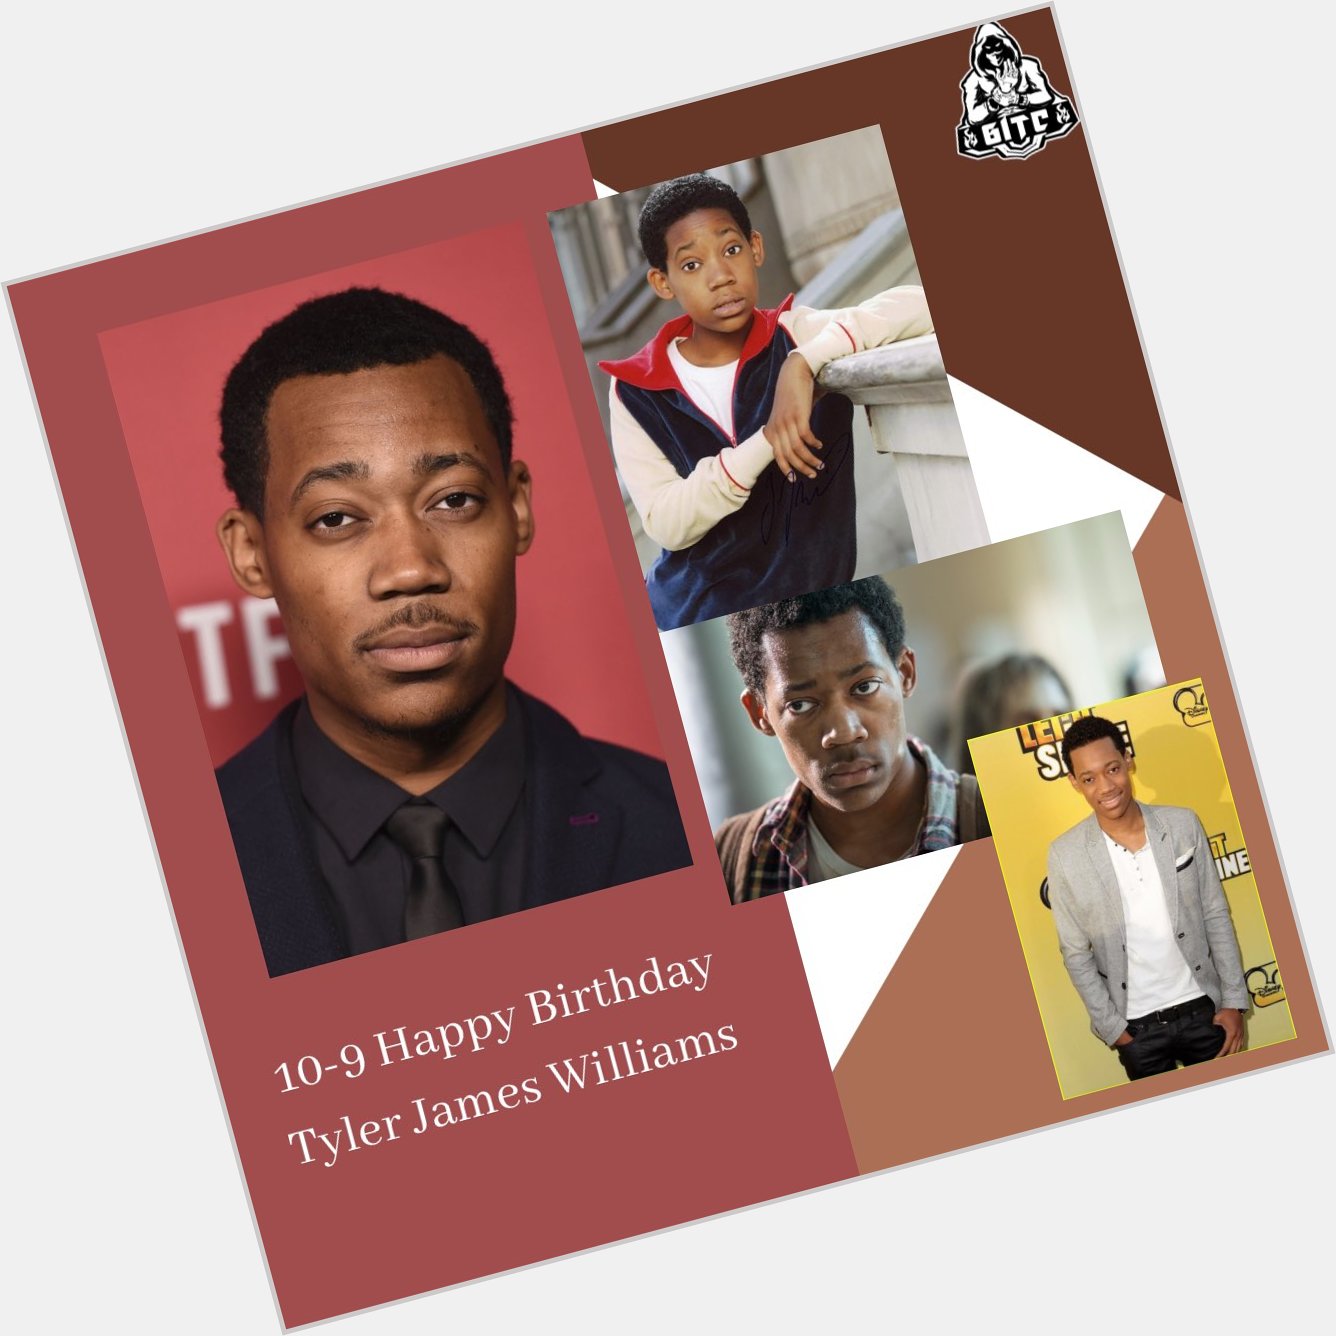 10-9 Happy Birthday     to the multi talented Tyler James Williams 